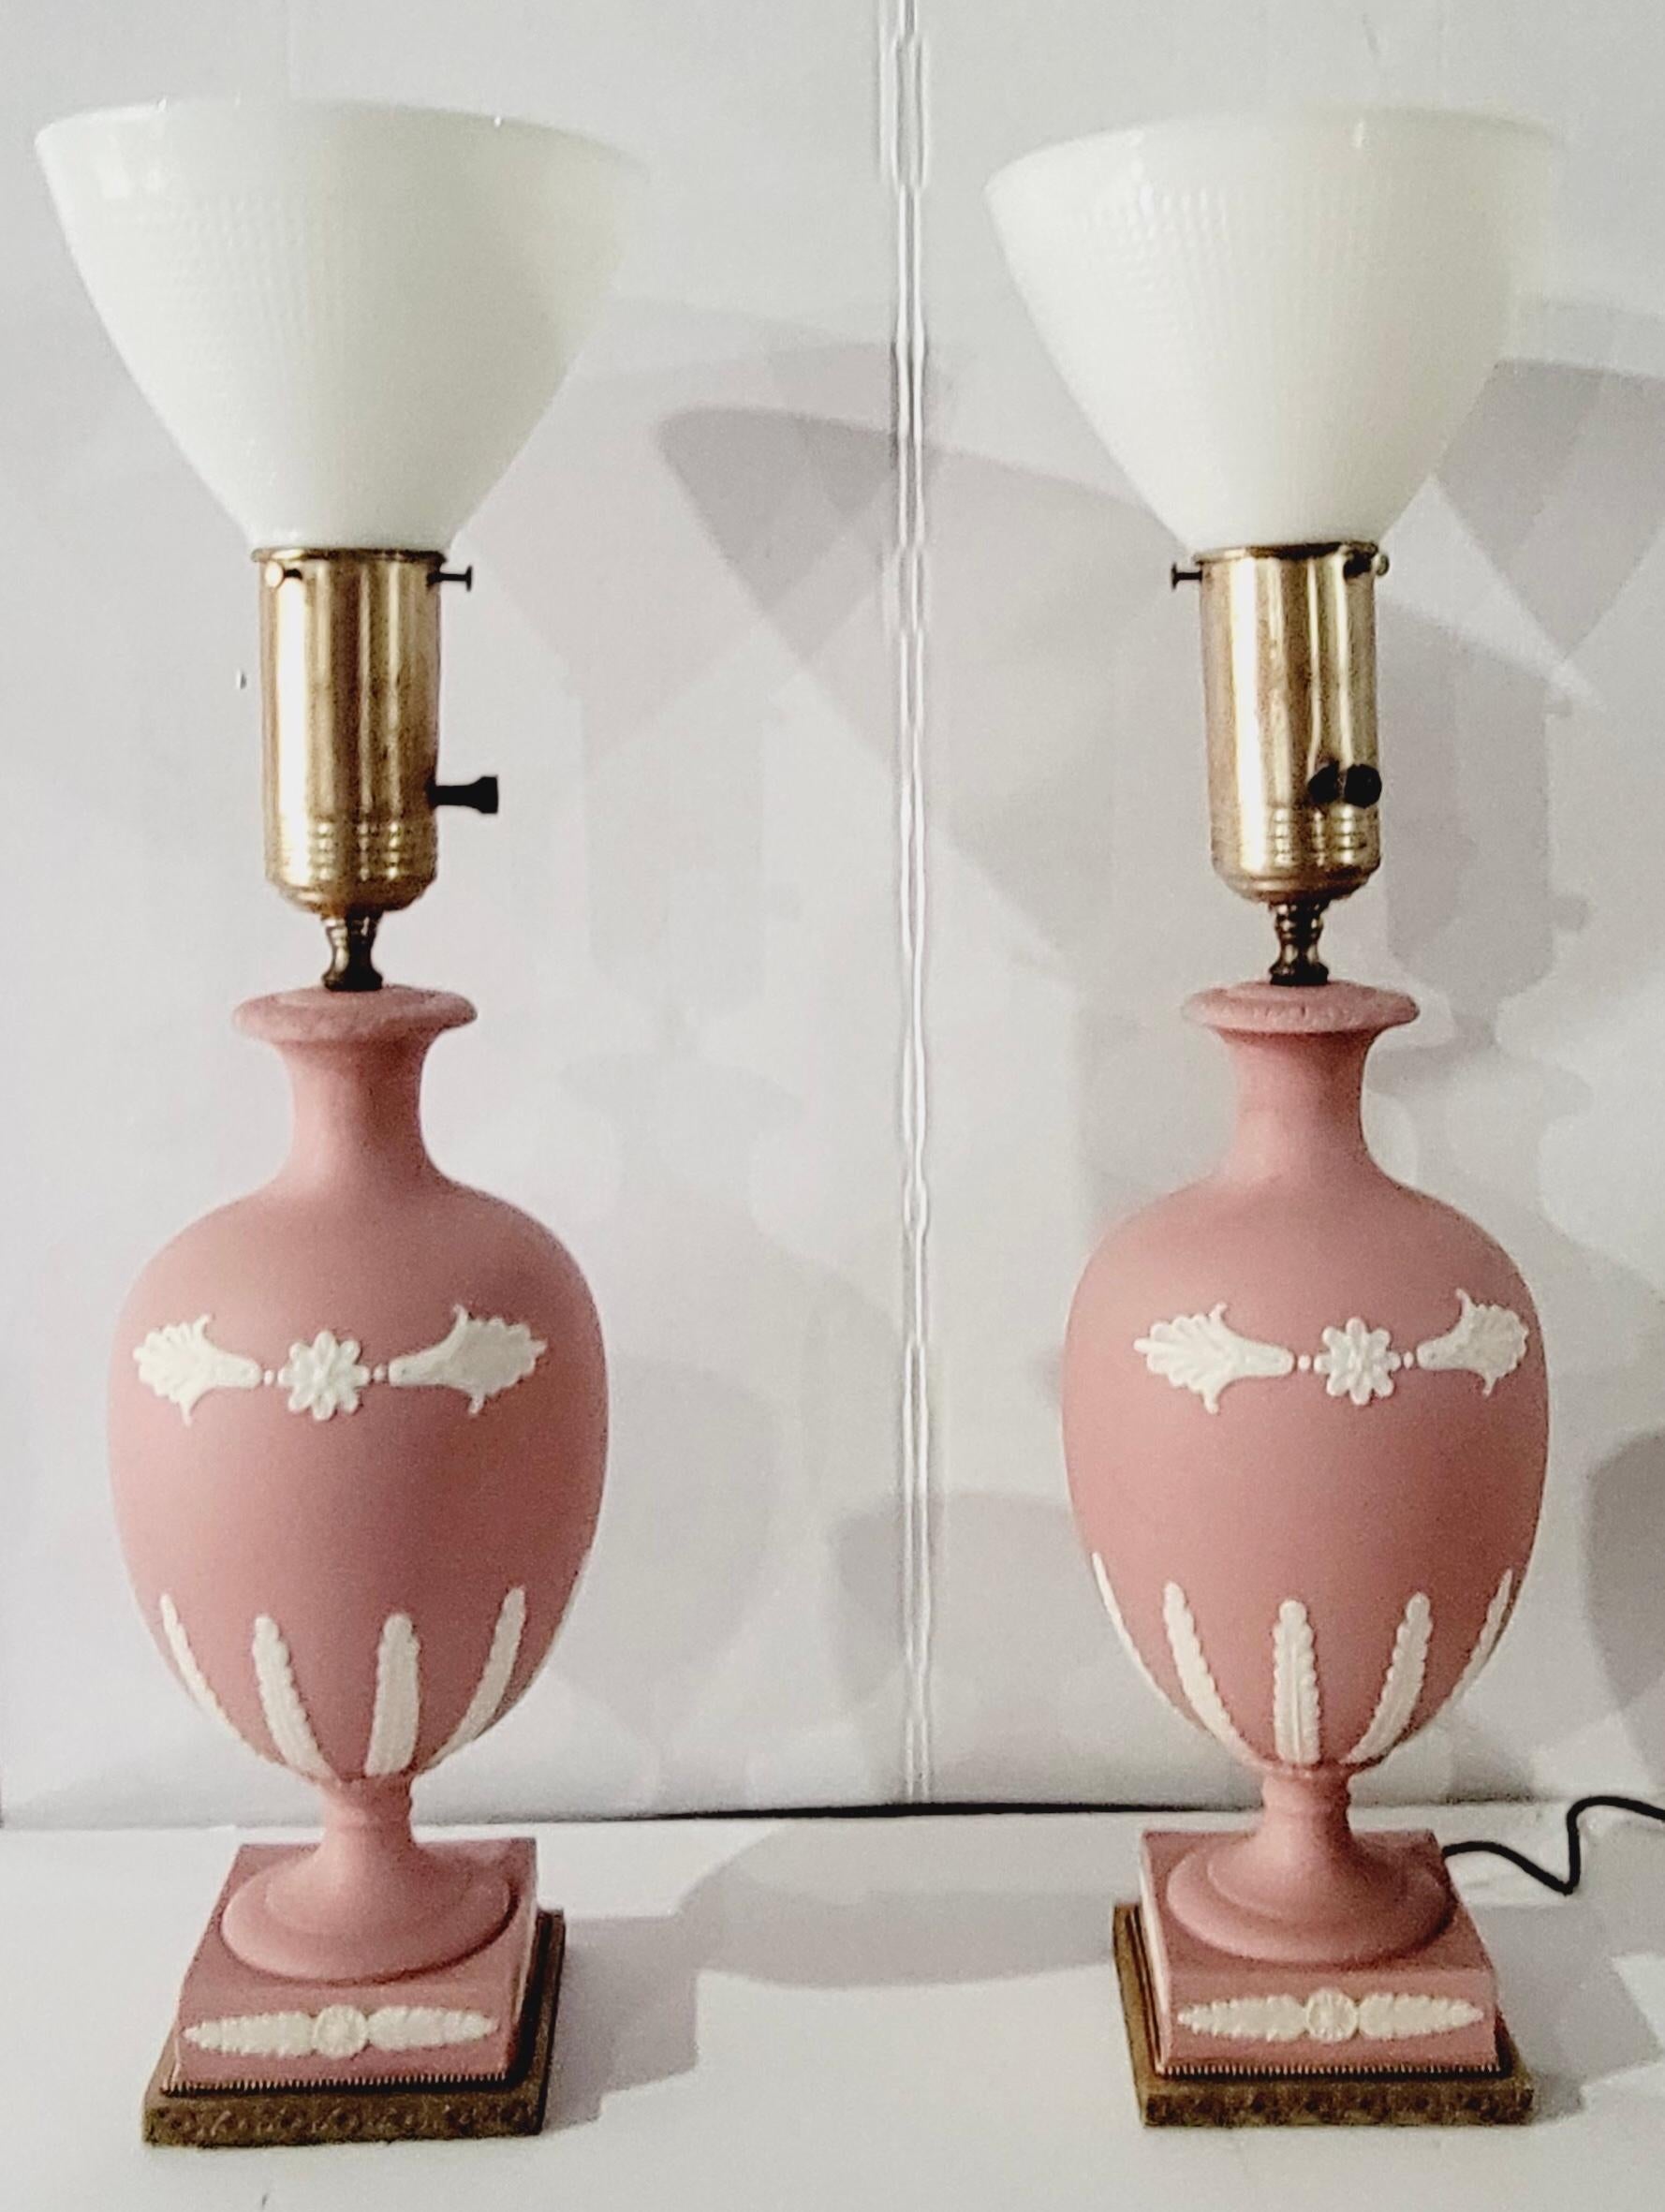 This is a lovely pair of 1950s neoclassical style pink basalt pottery lamps attributed to Wedgwood. They even have the original milkglass shades! They are in very good condition.